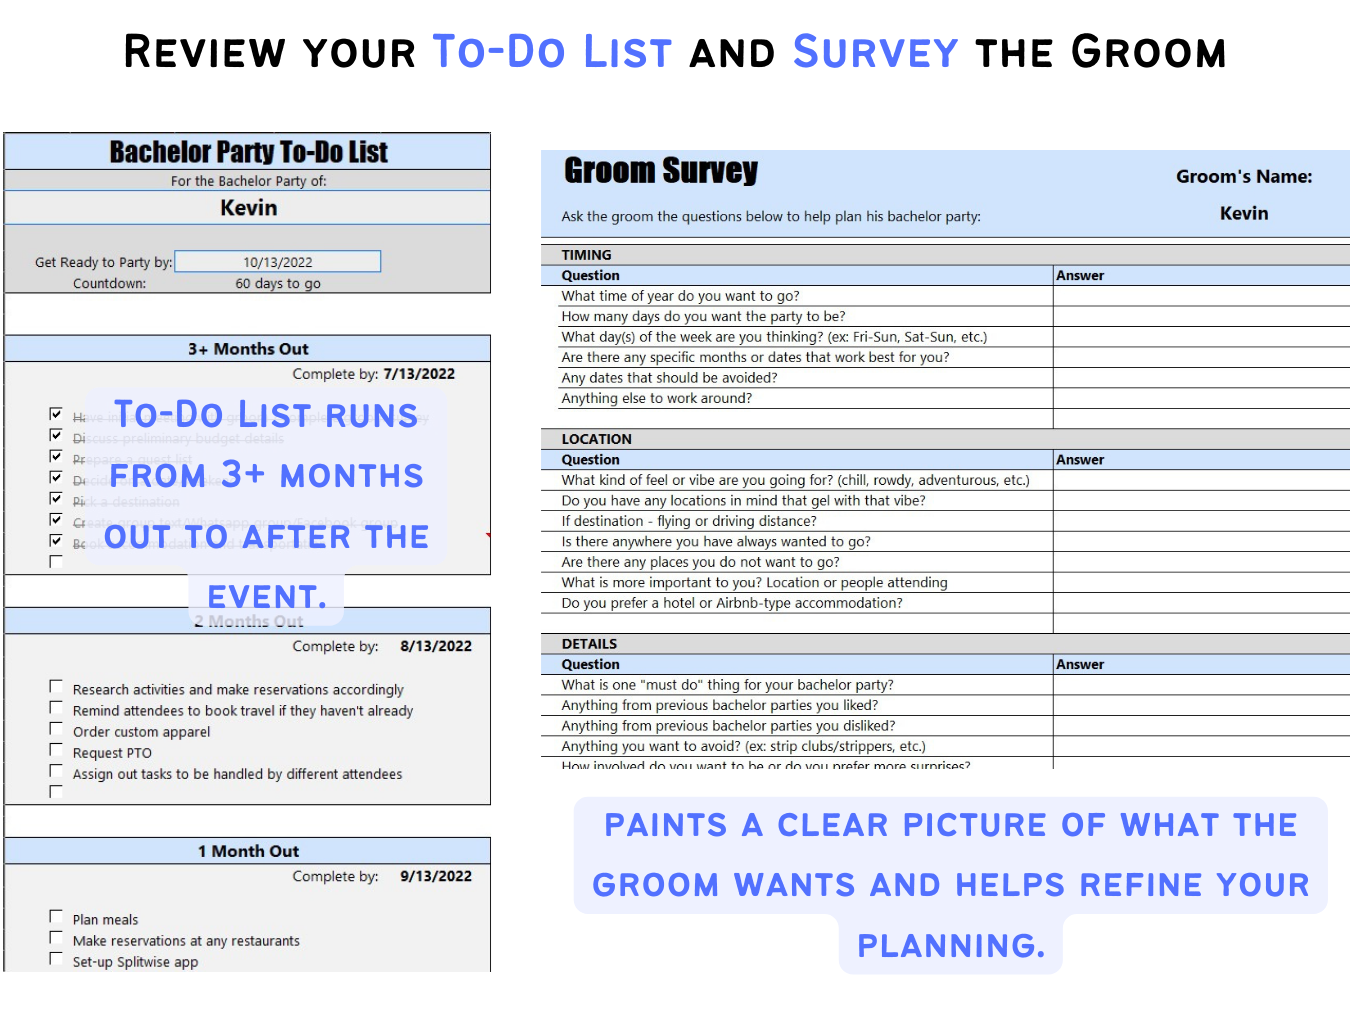 Bachelor Party To-Do List Groom Survey